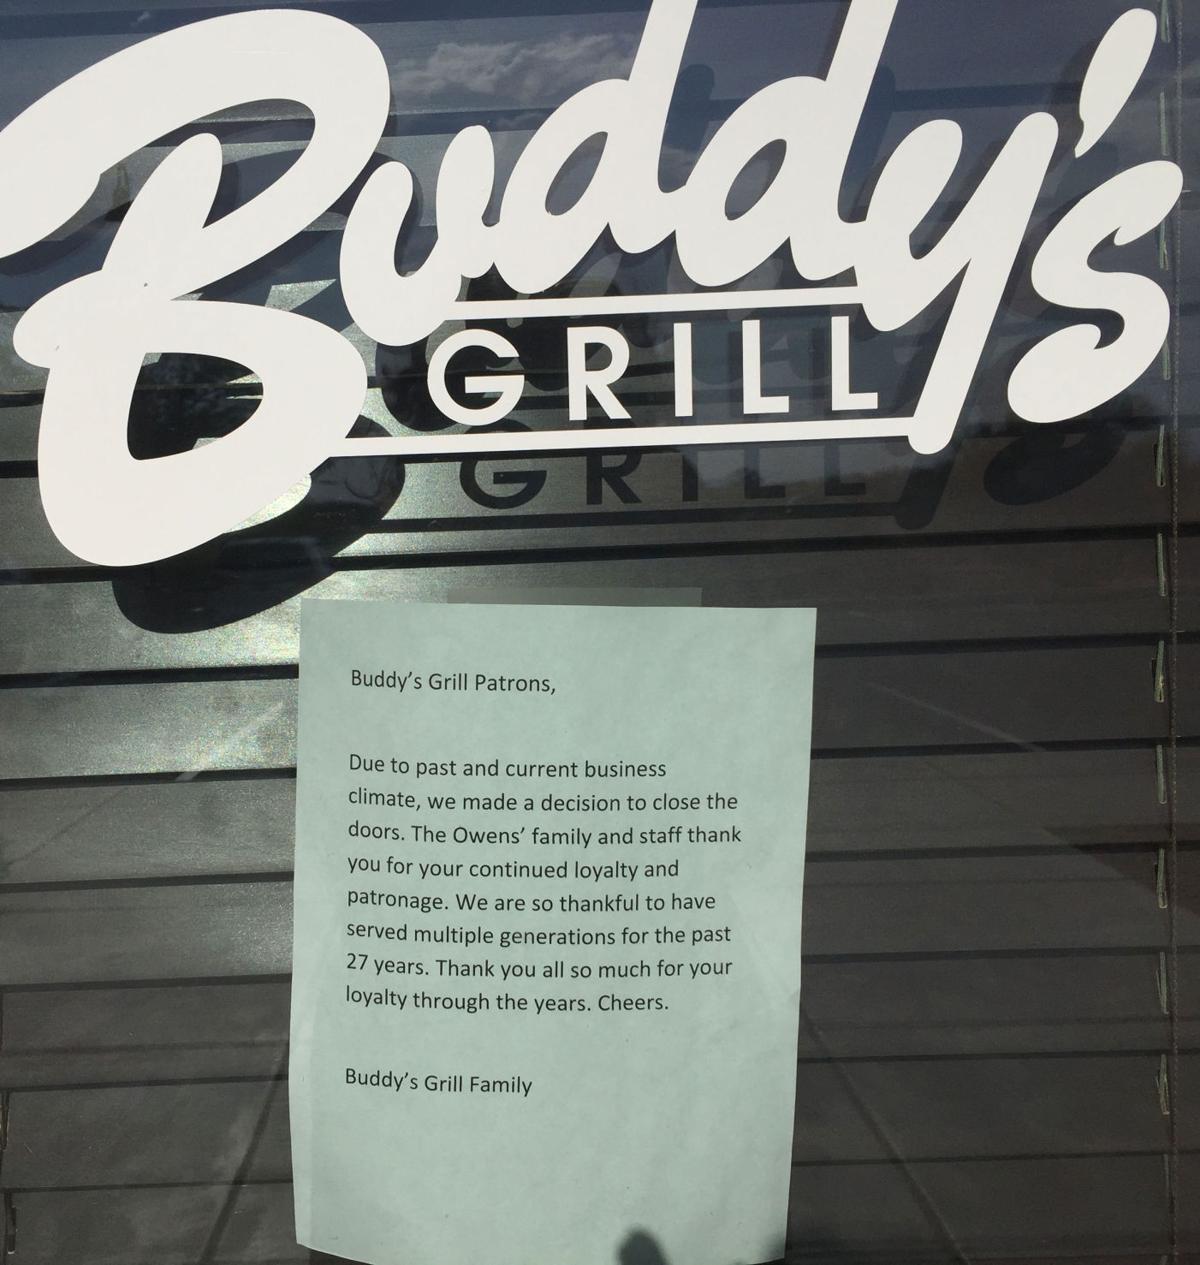 Buddy's Grill the latest in string of summer restaurant closures